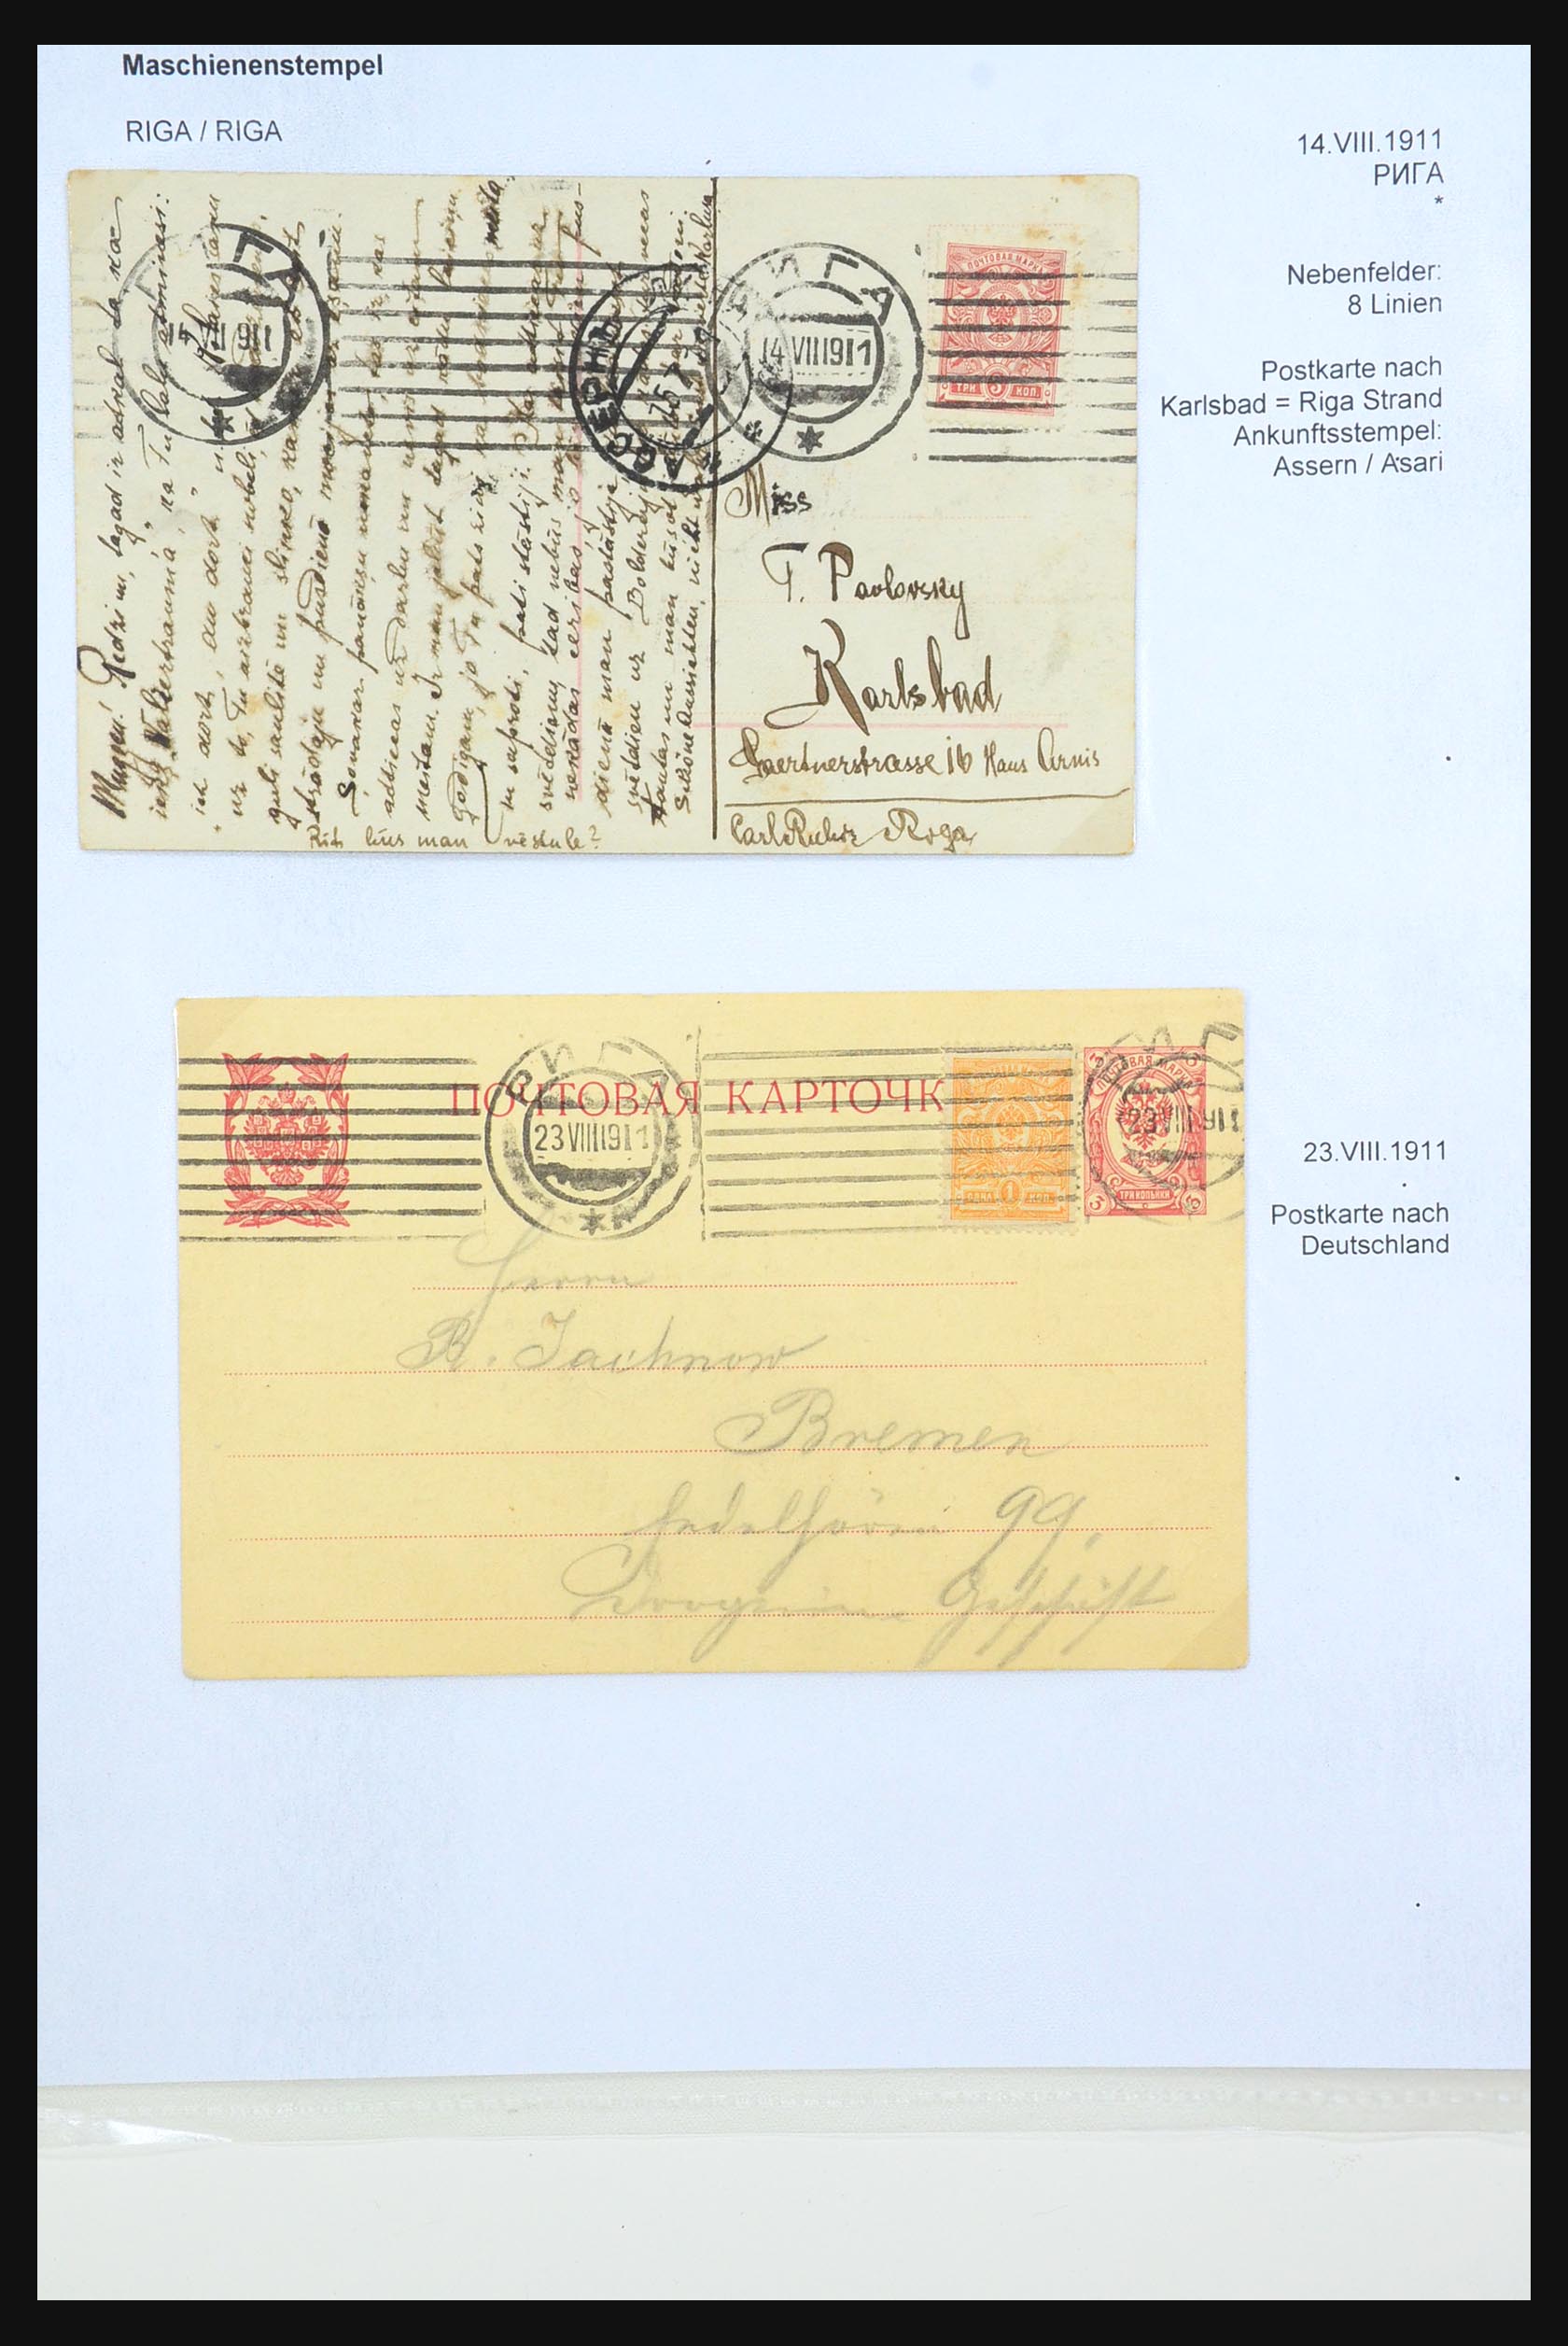 31305 027 - 31305 Latvia as part of Russia 1817-1918.